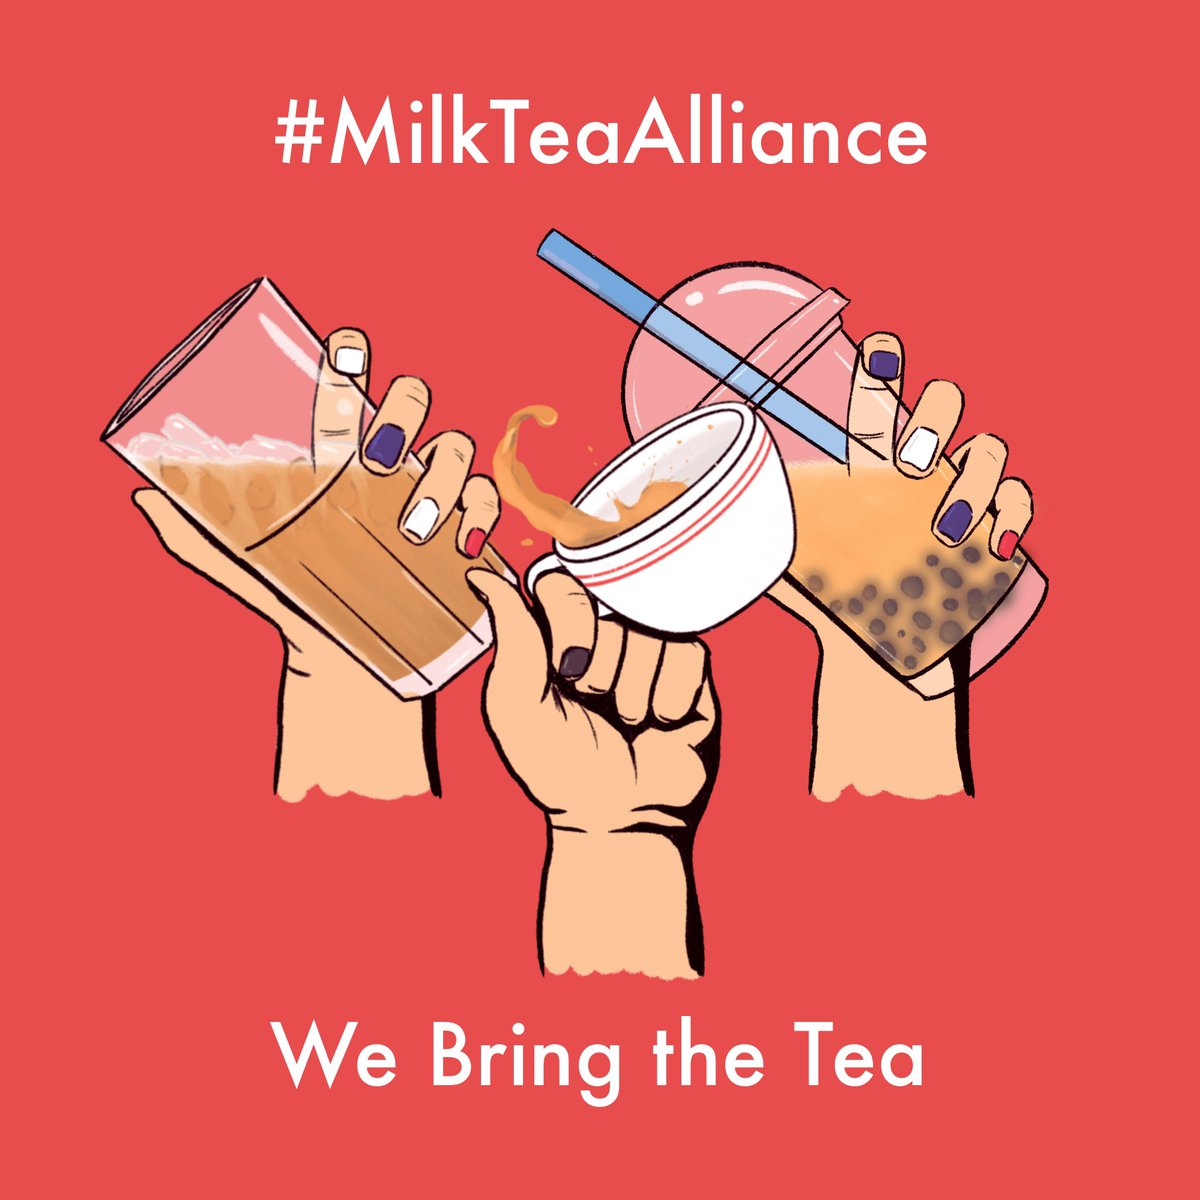 So, back to the original point - "membership" of the  #MilkTeaAlliance   is very fluid. But more interesting is seeing how the many protest movements interacted, how activists expanded their networks, and shared strategies and shoulders to cry on.Source: TG (Apr 2020)